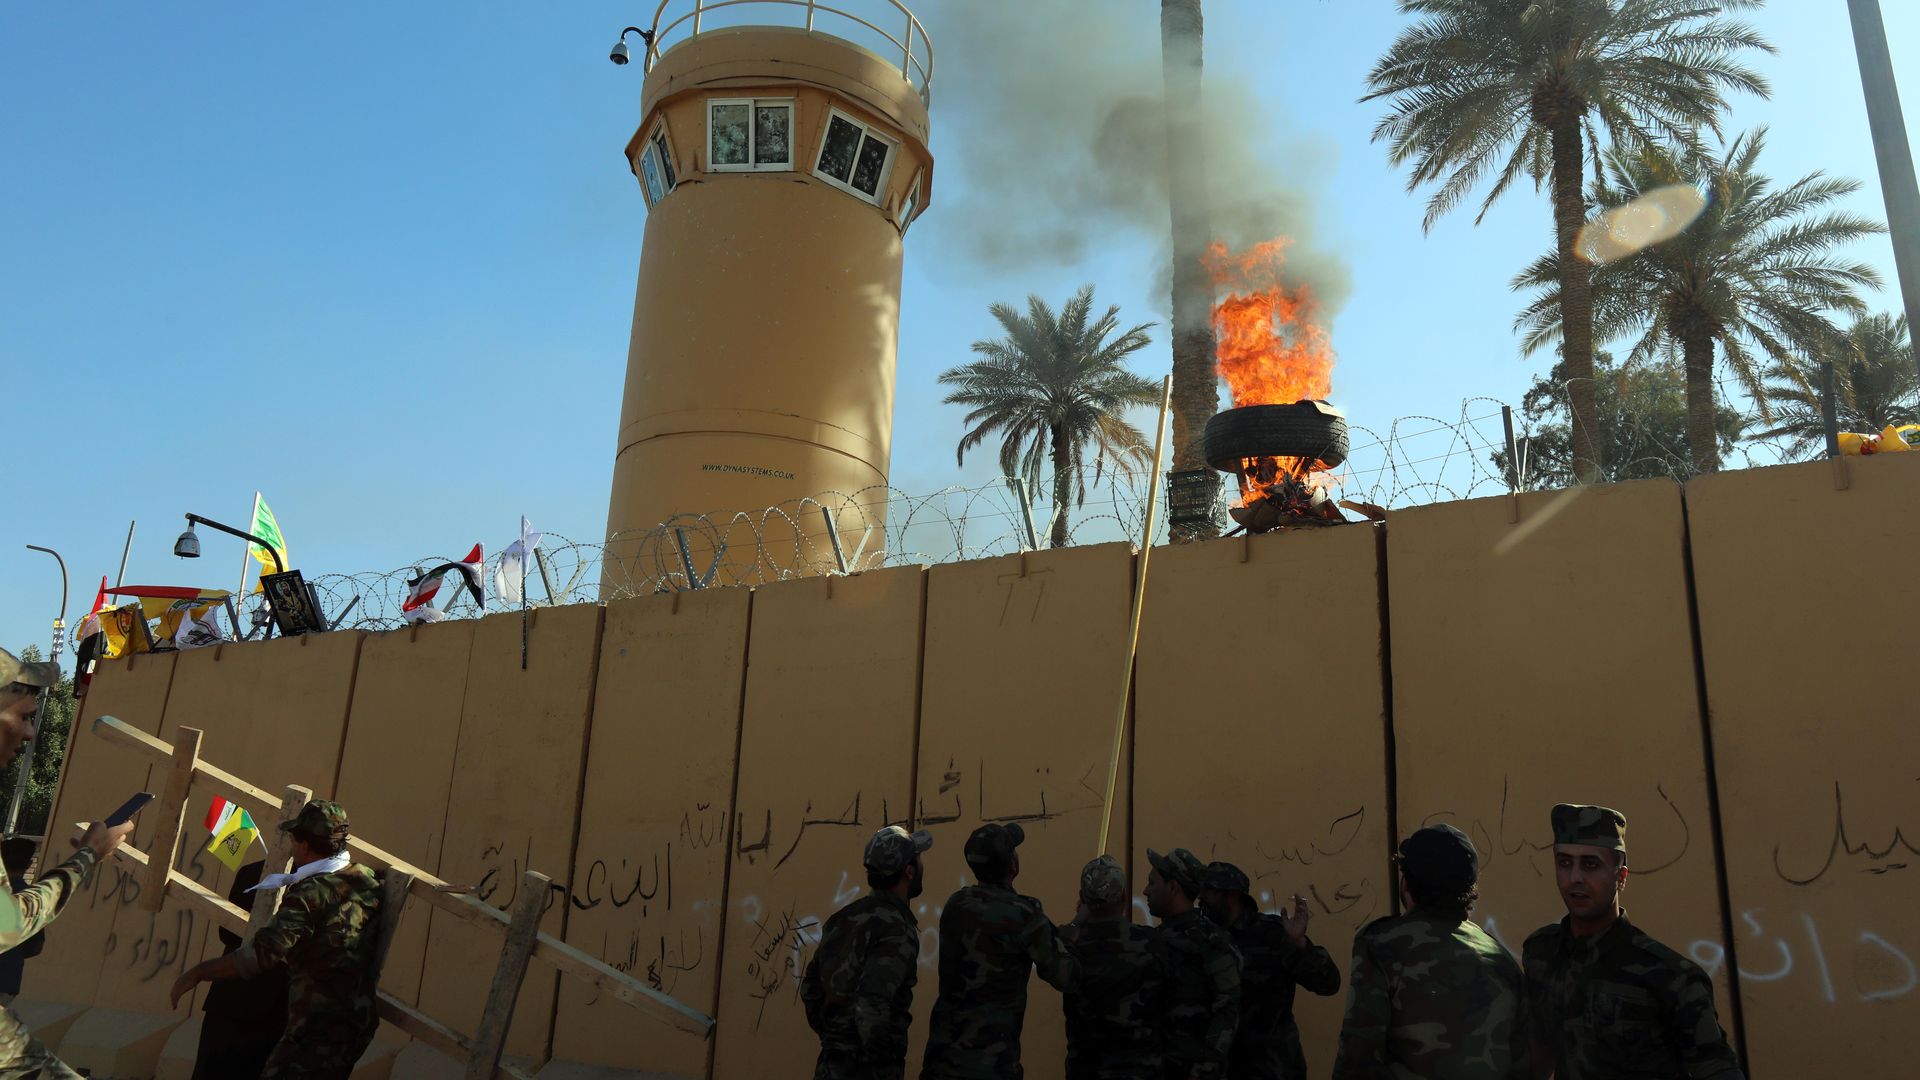 Protesters try to set fire to the outside fence of the U.S. embassy in Baghdad, Iraq on Dec. 31